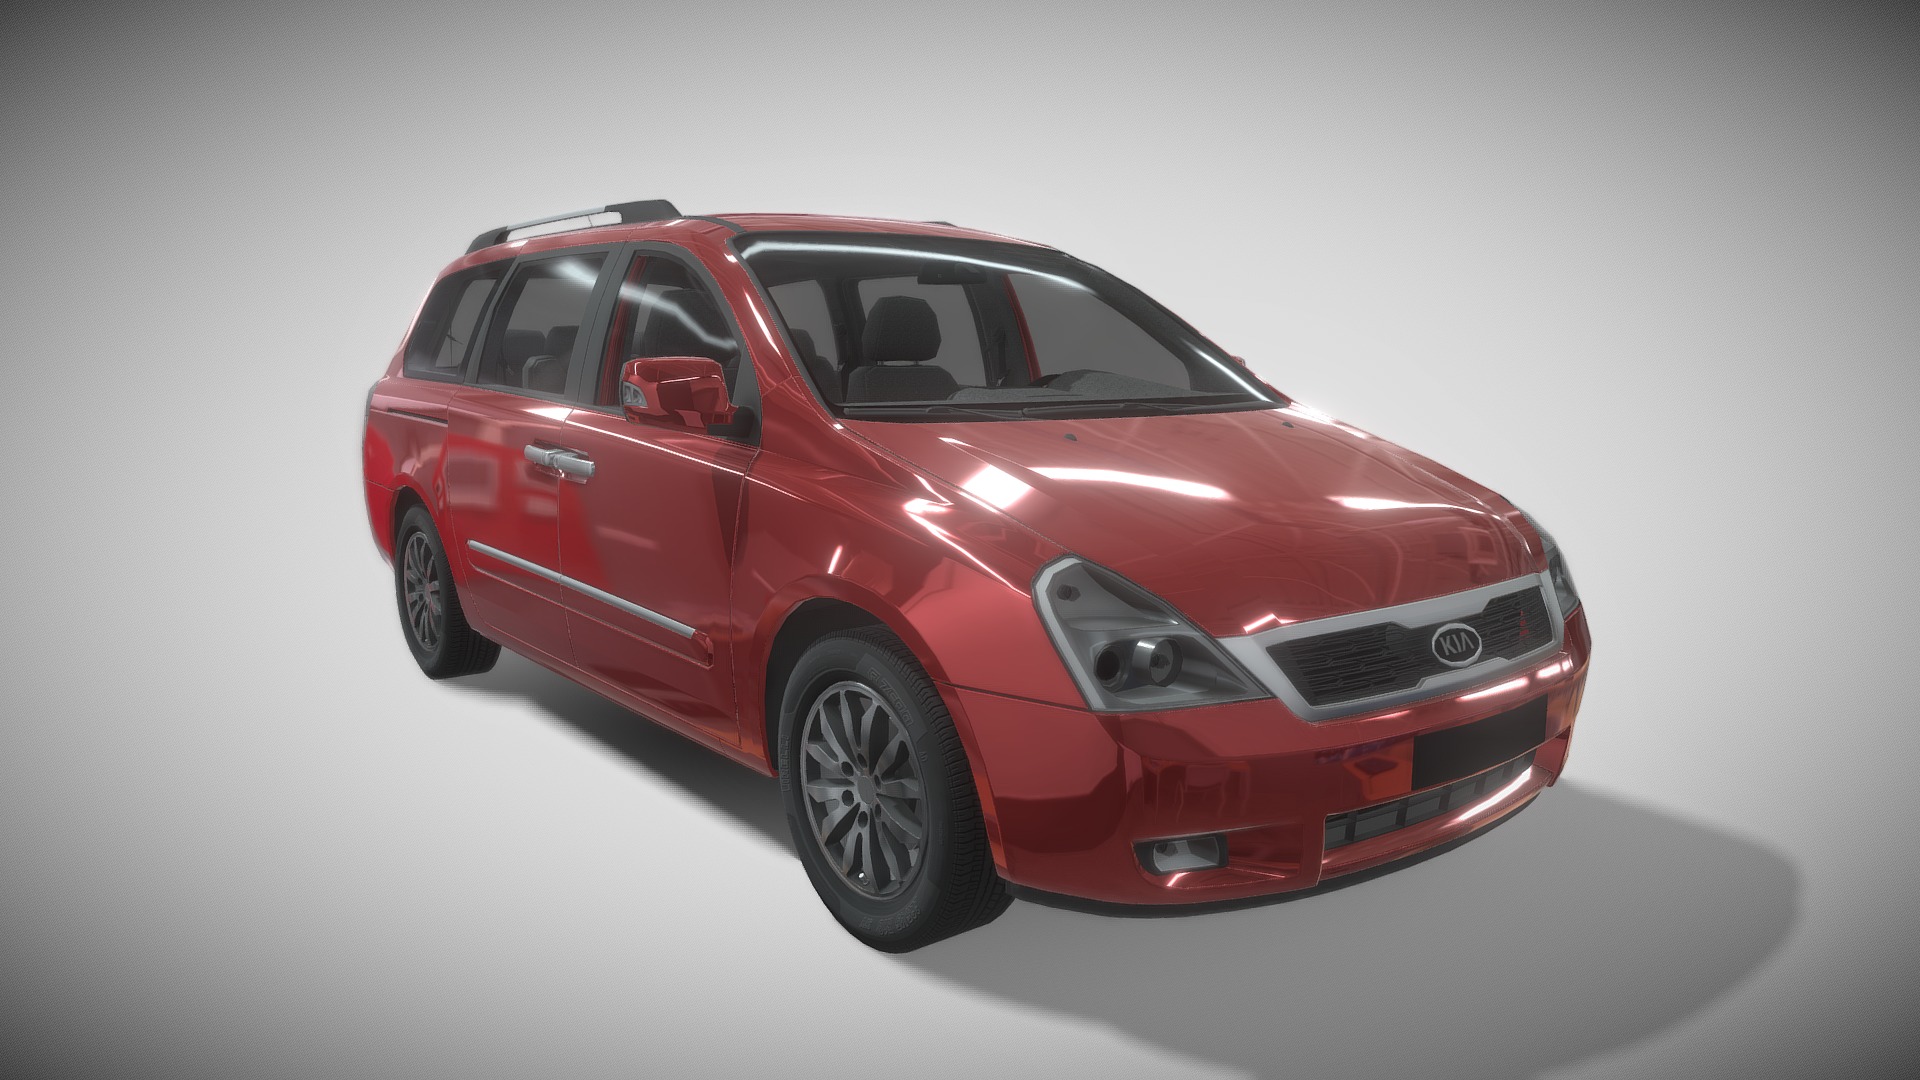 3D model Kia Familycar Model - This is a 3D model of the Kia Familycar Model. The 3D model is about a red car on a white background.